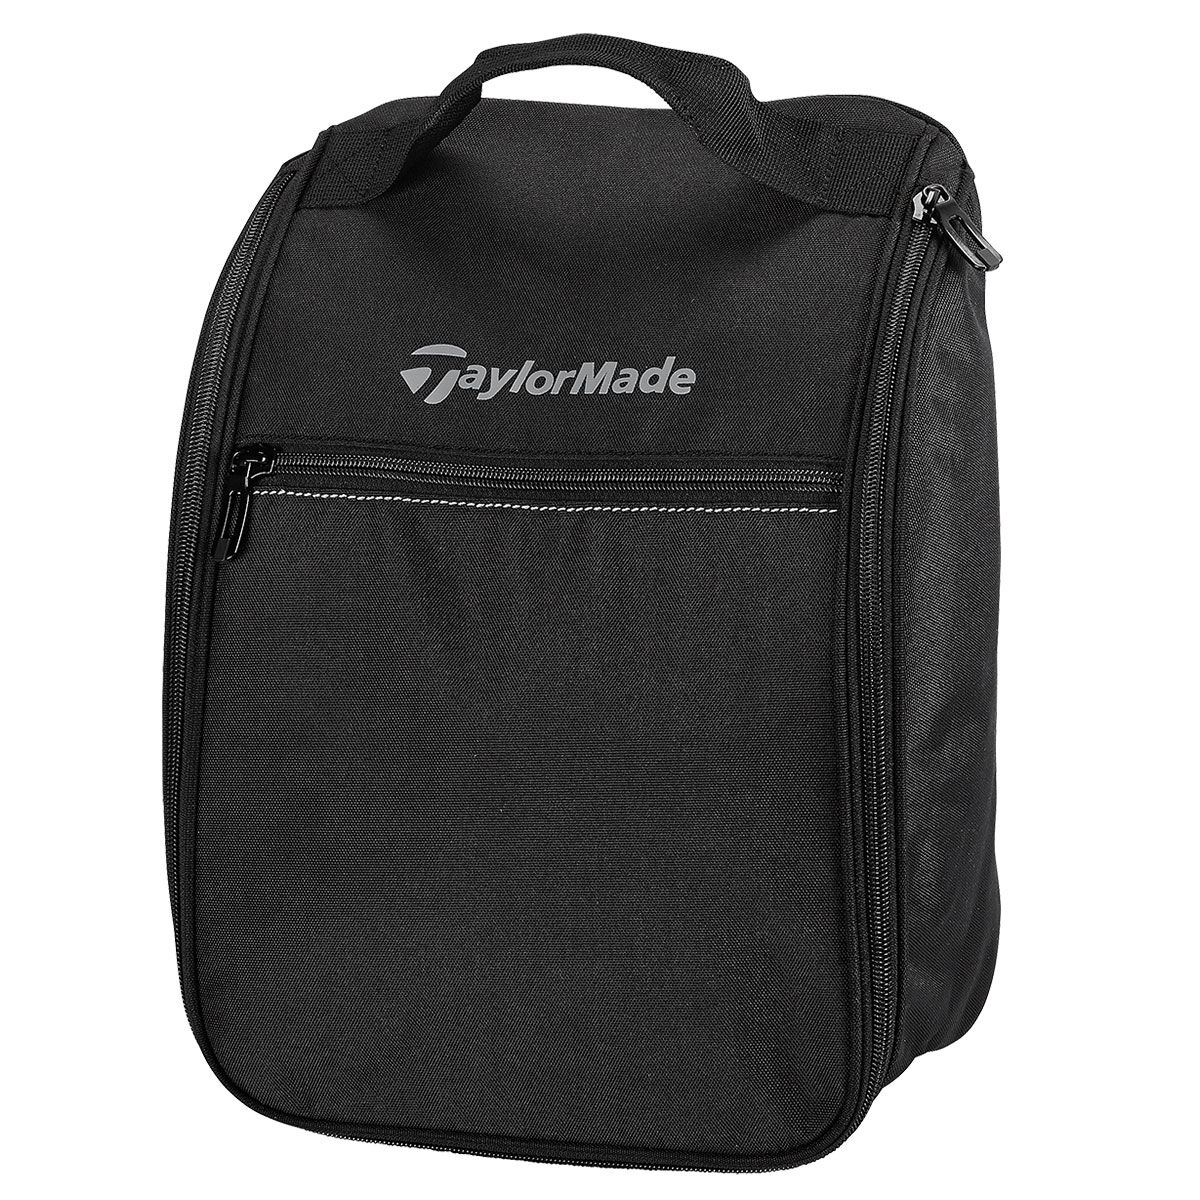 TaylorMade Players Shoe Bag from 